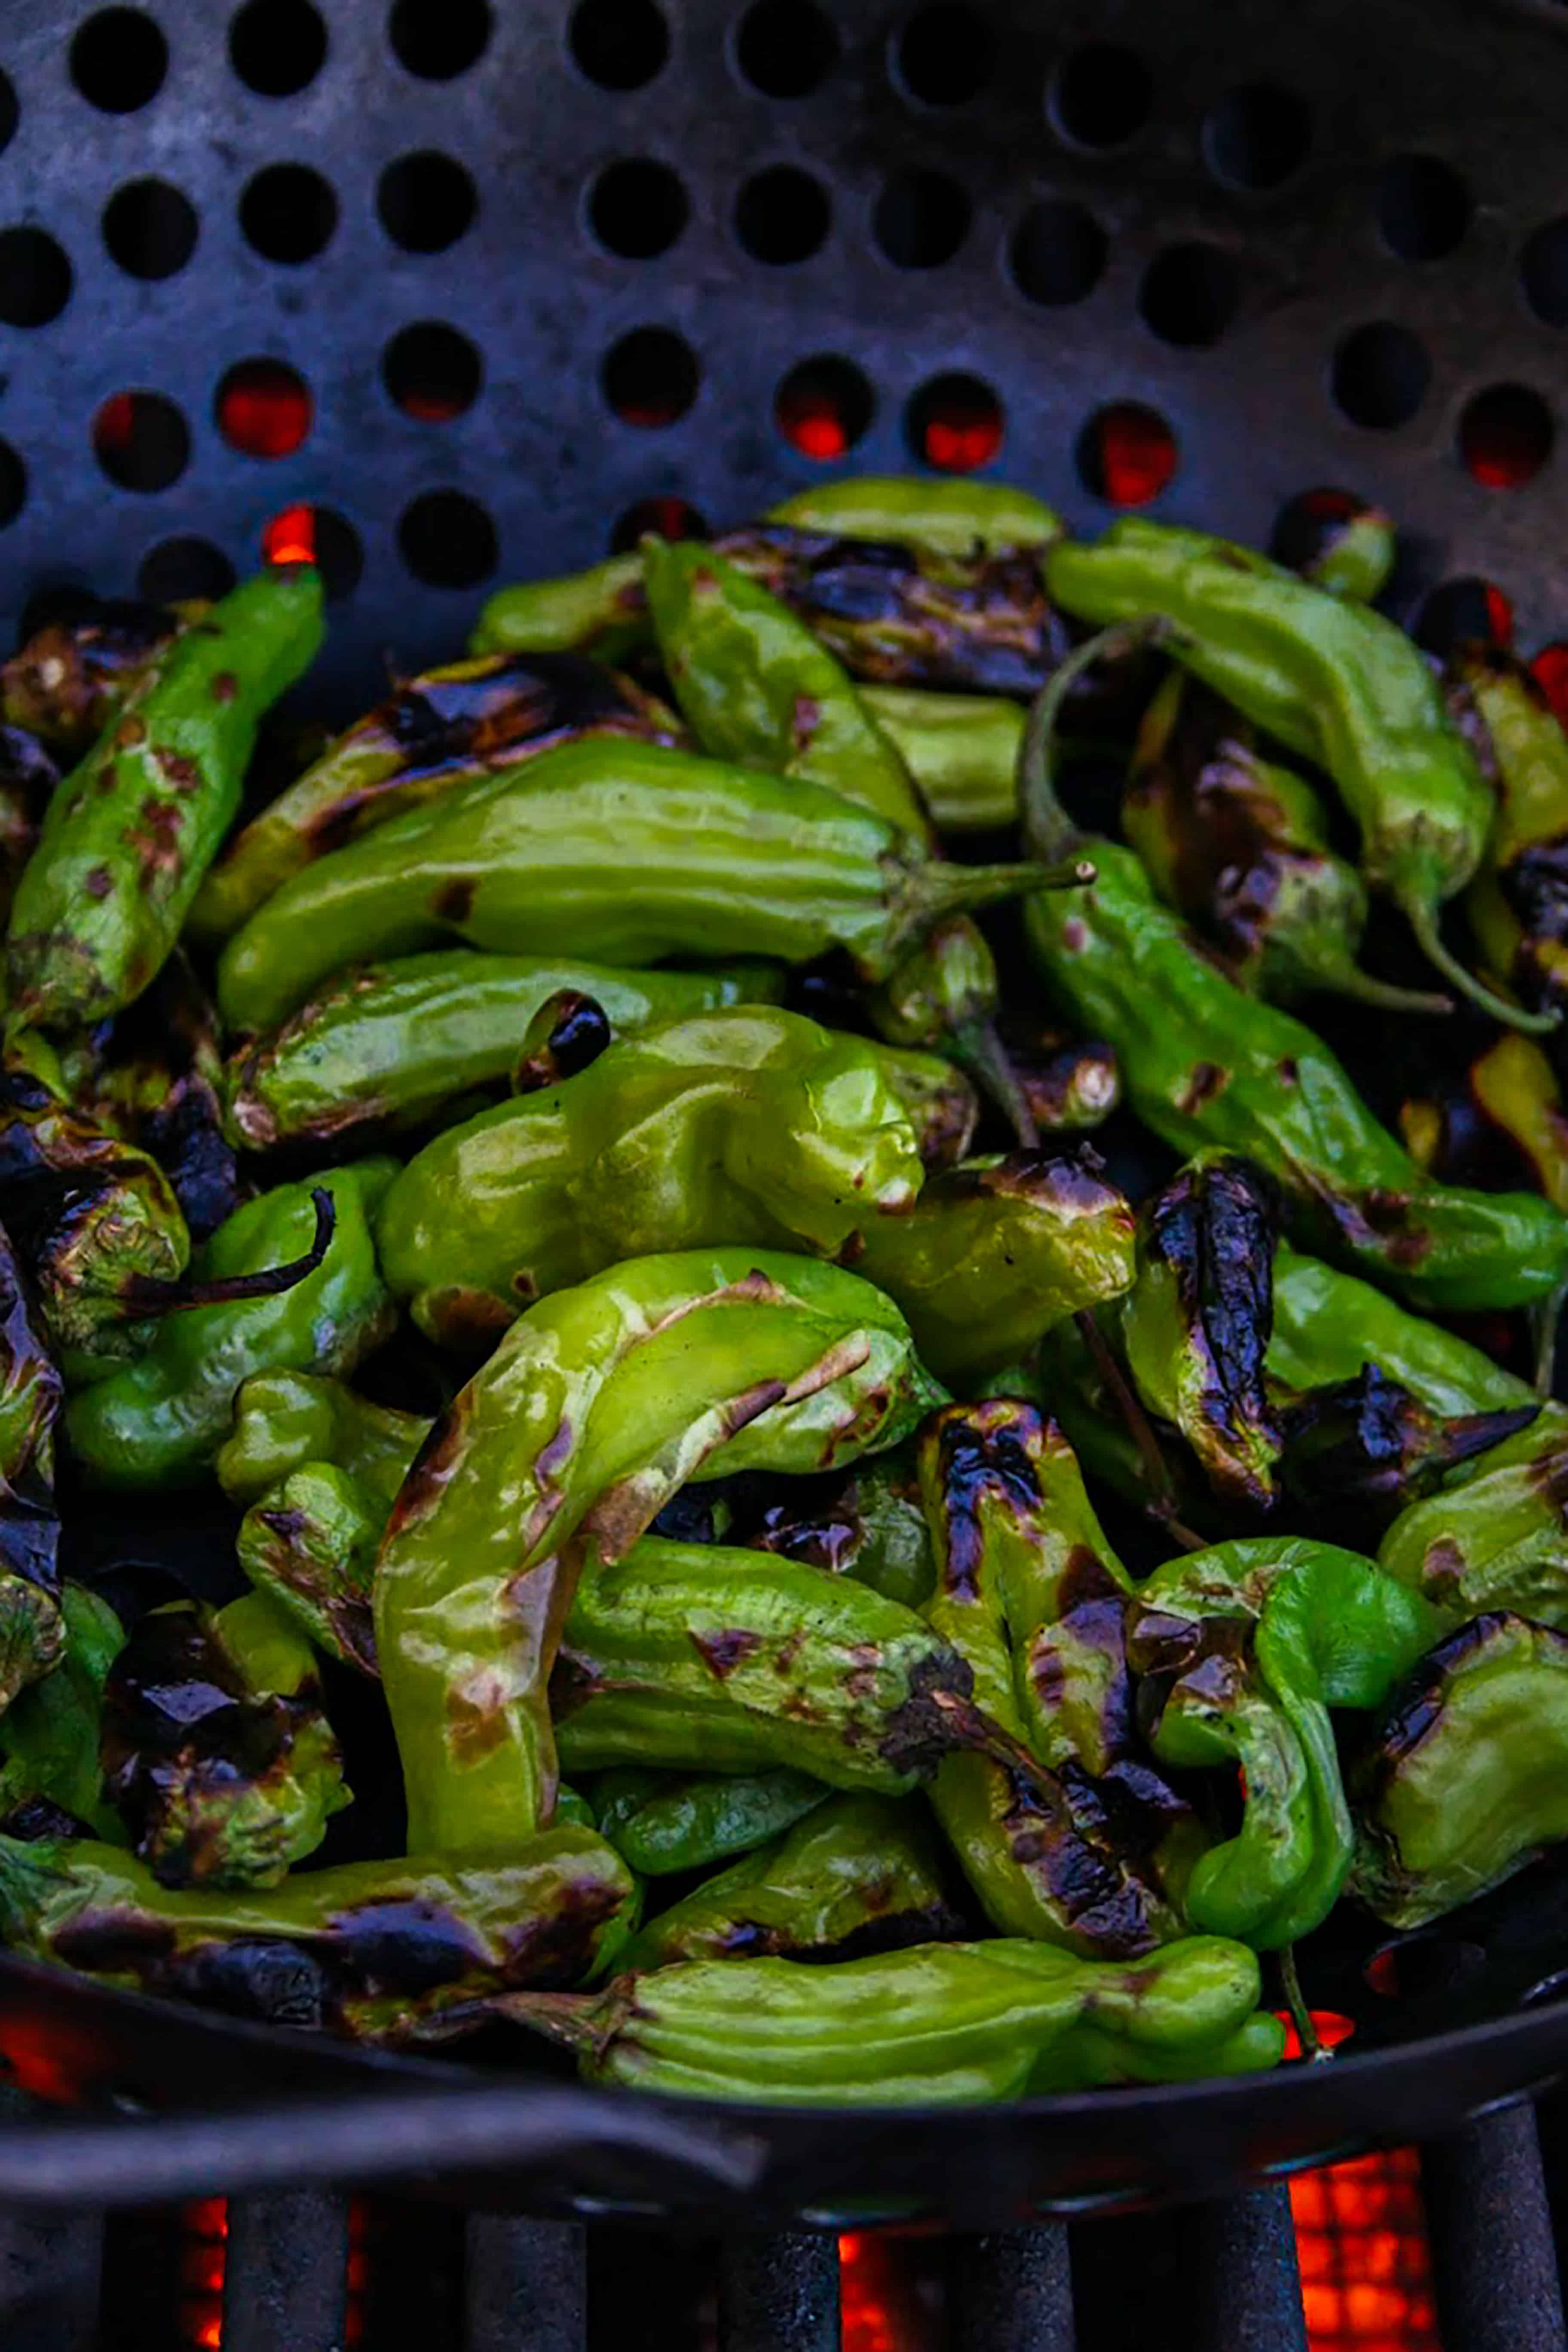 Blistered and charred shishito peppers cooked on the grill.